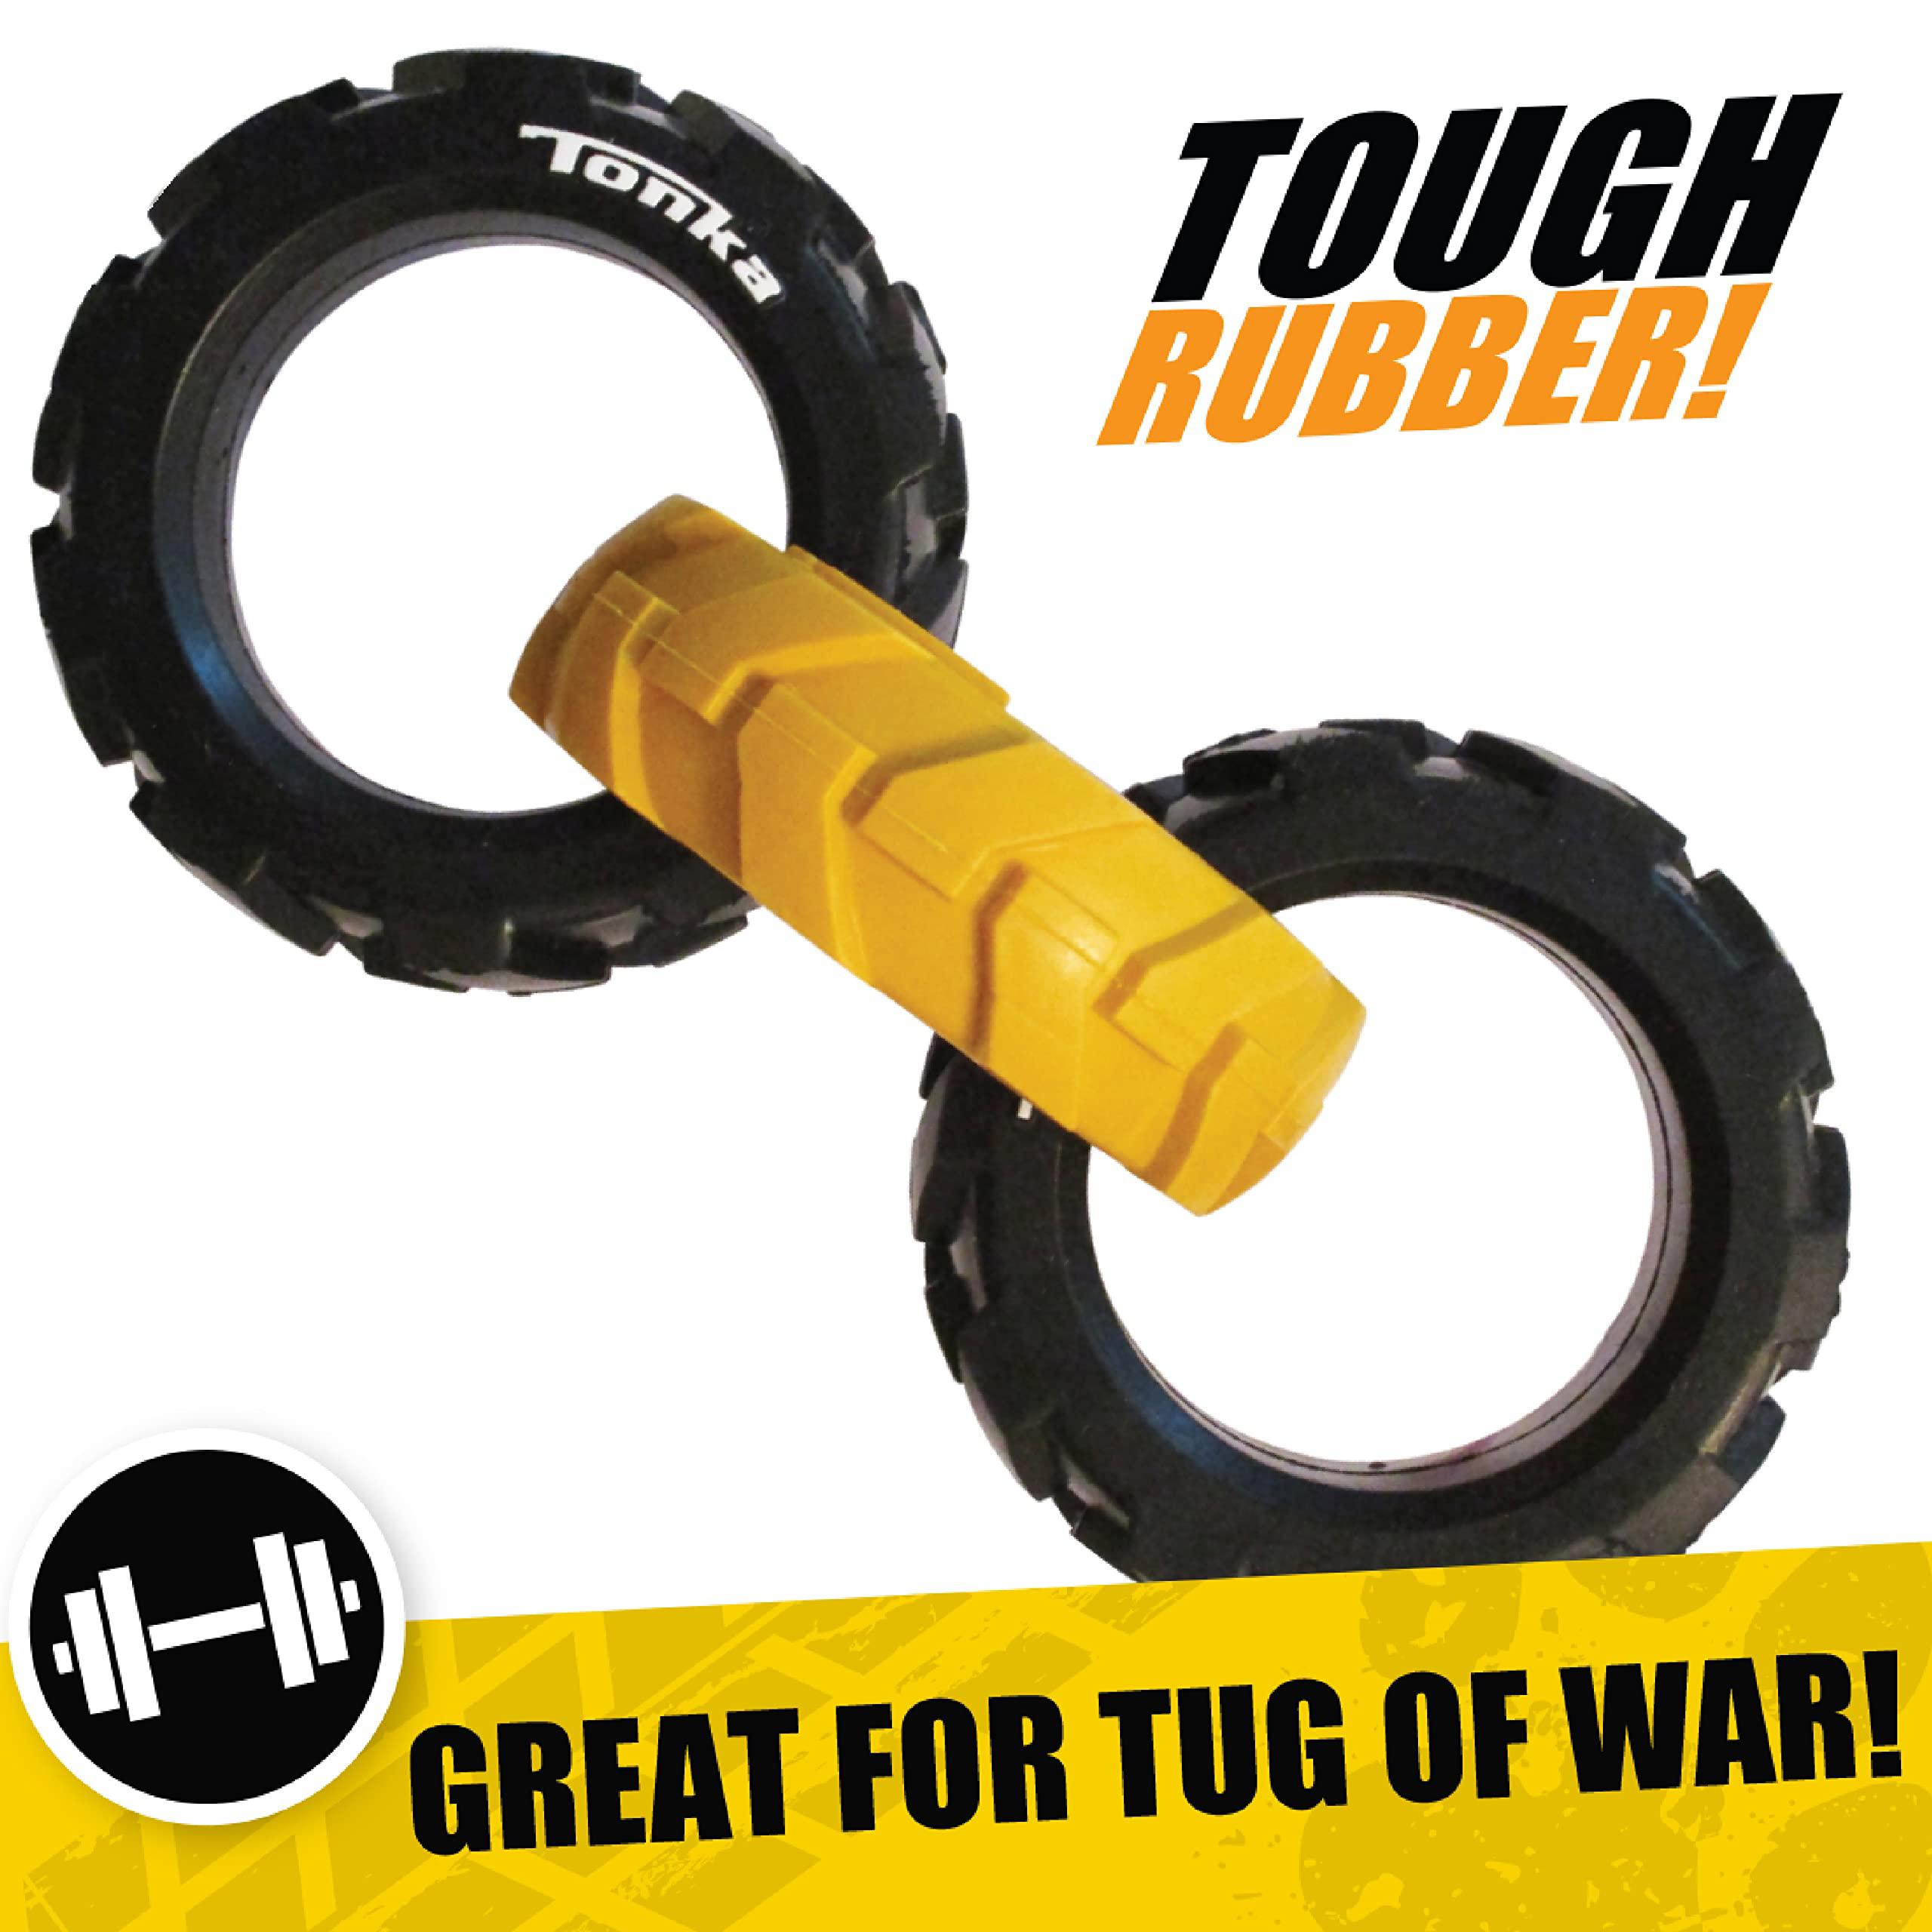 tonka rubber 3-ring tug dog toy, lightweight, durable and water resistant, 7.5 inches, for medium/large breeds, single unit, 